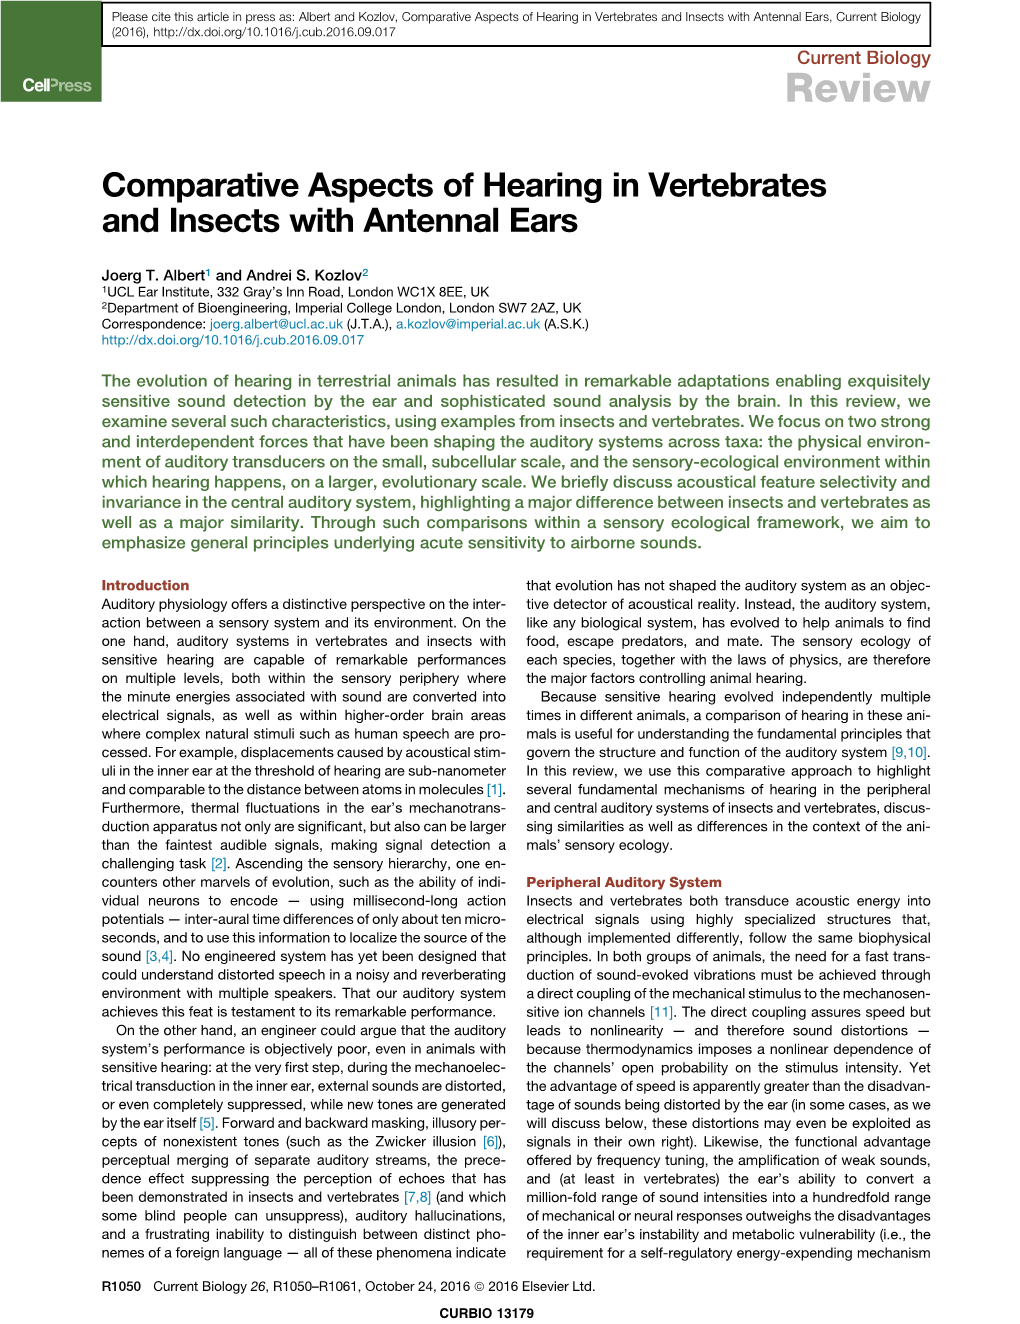 Comparative Aspects of Hearing in Vertebrates and Insects